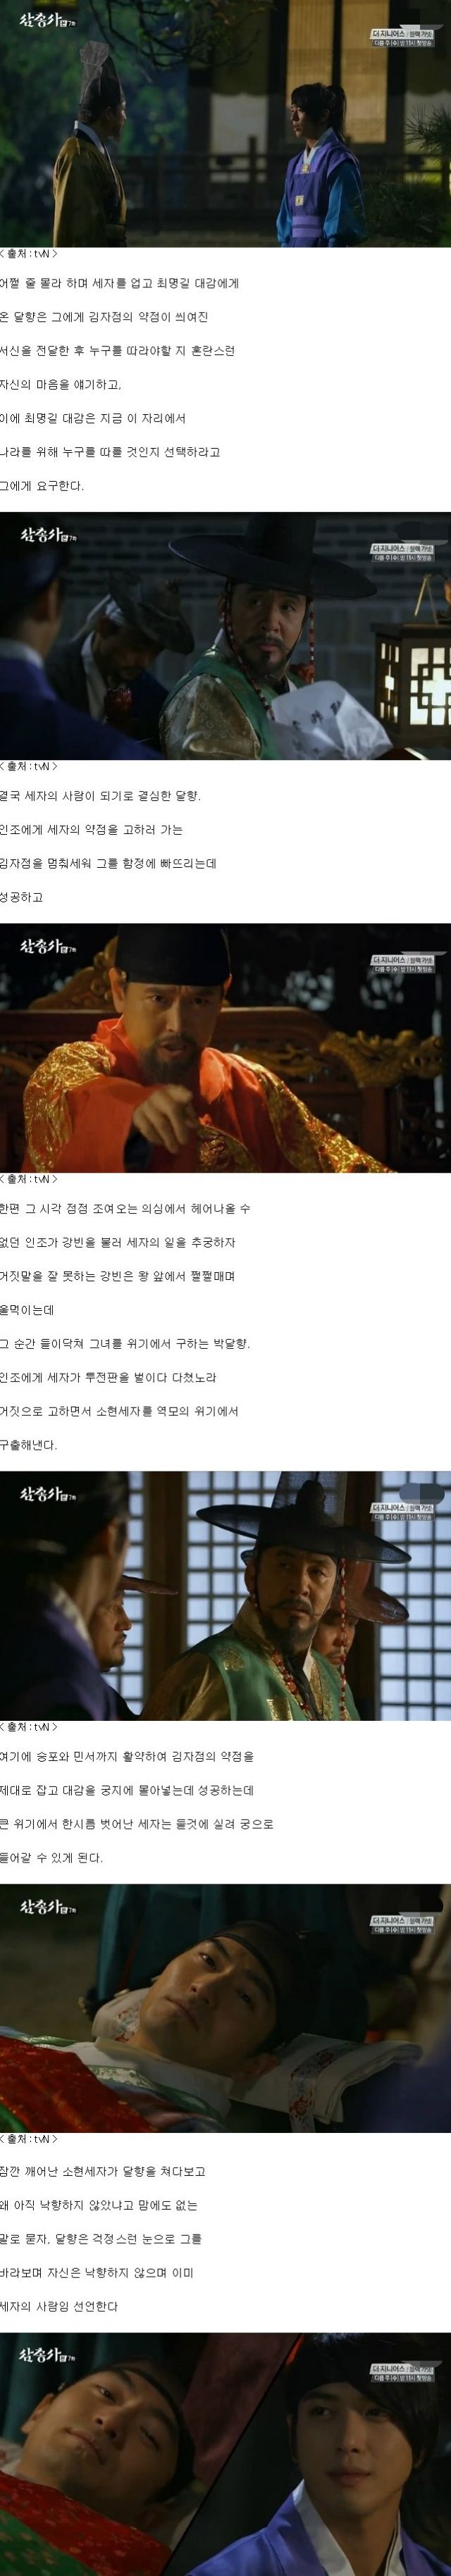 episode 7 captures for the Korean drama 'The Three Musketeers - Drama'